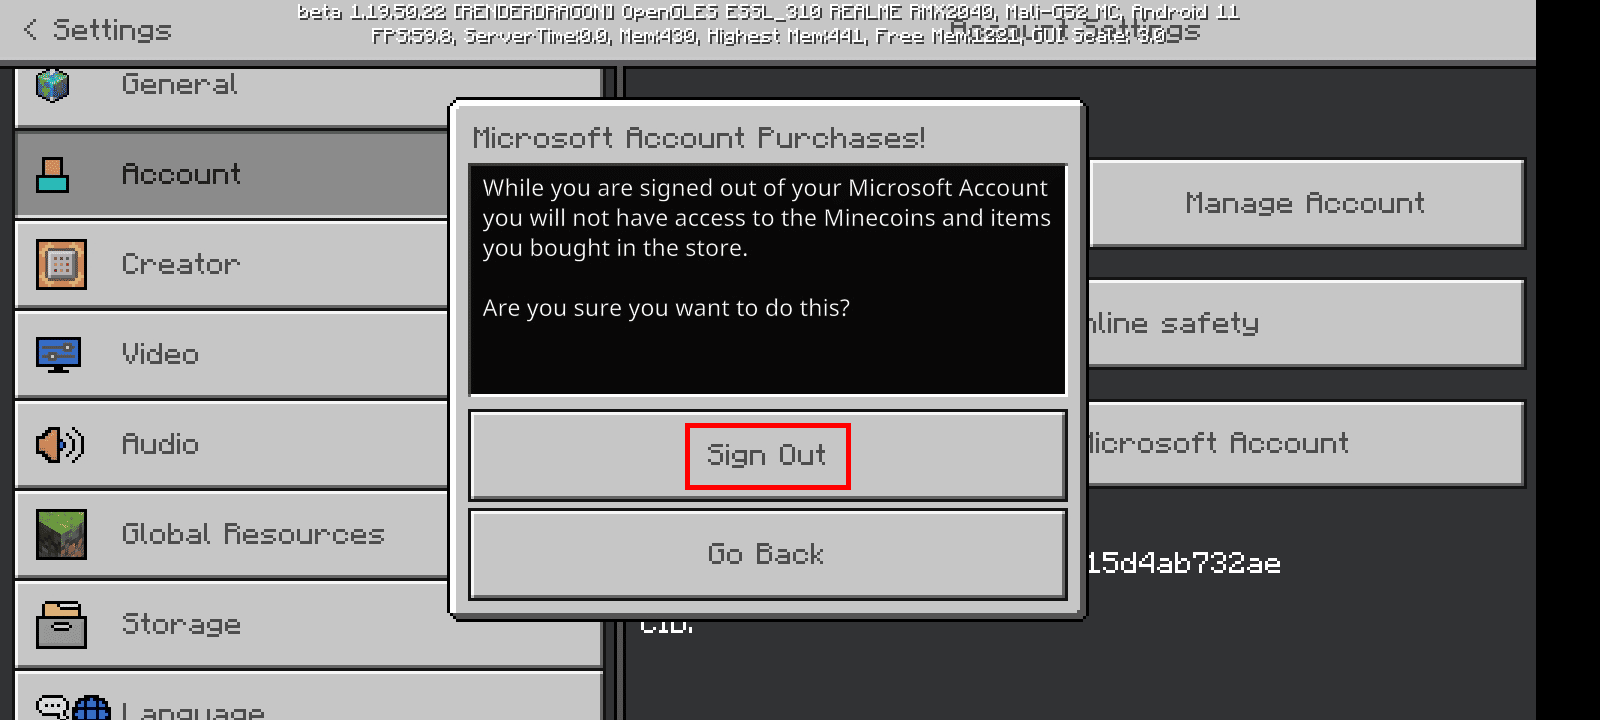 Tap on Sign Out to remove your Microsoft account from Minecraft PE.